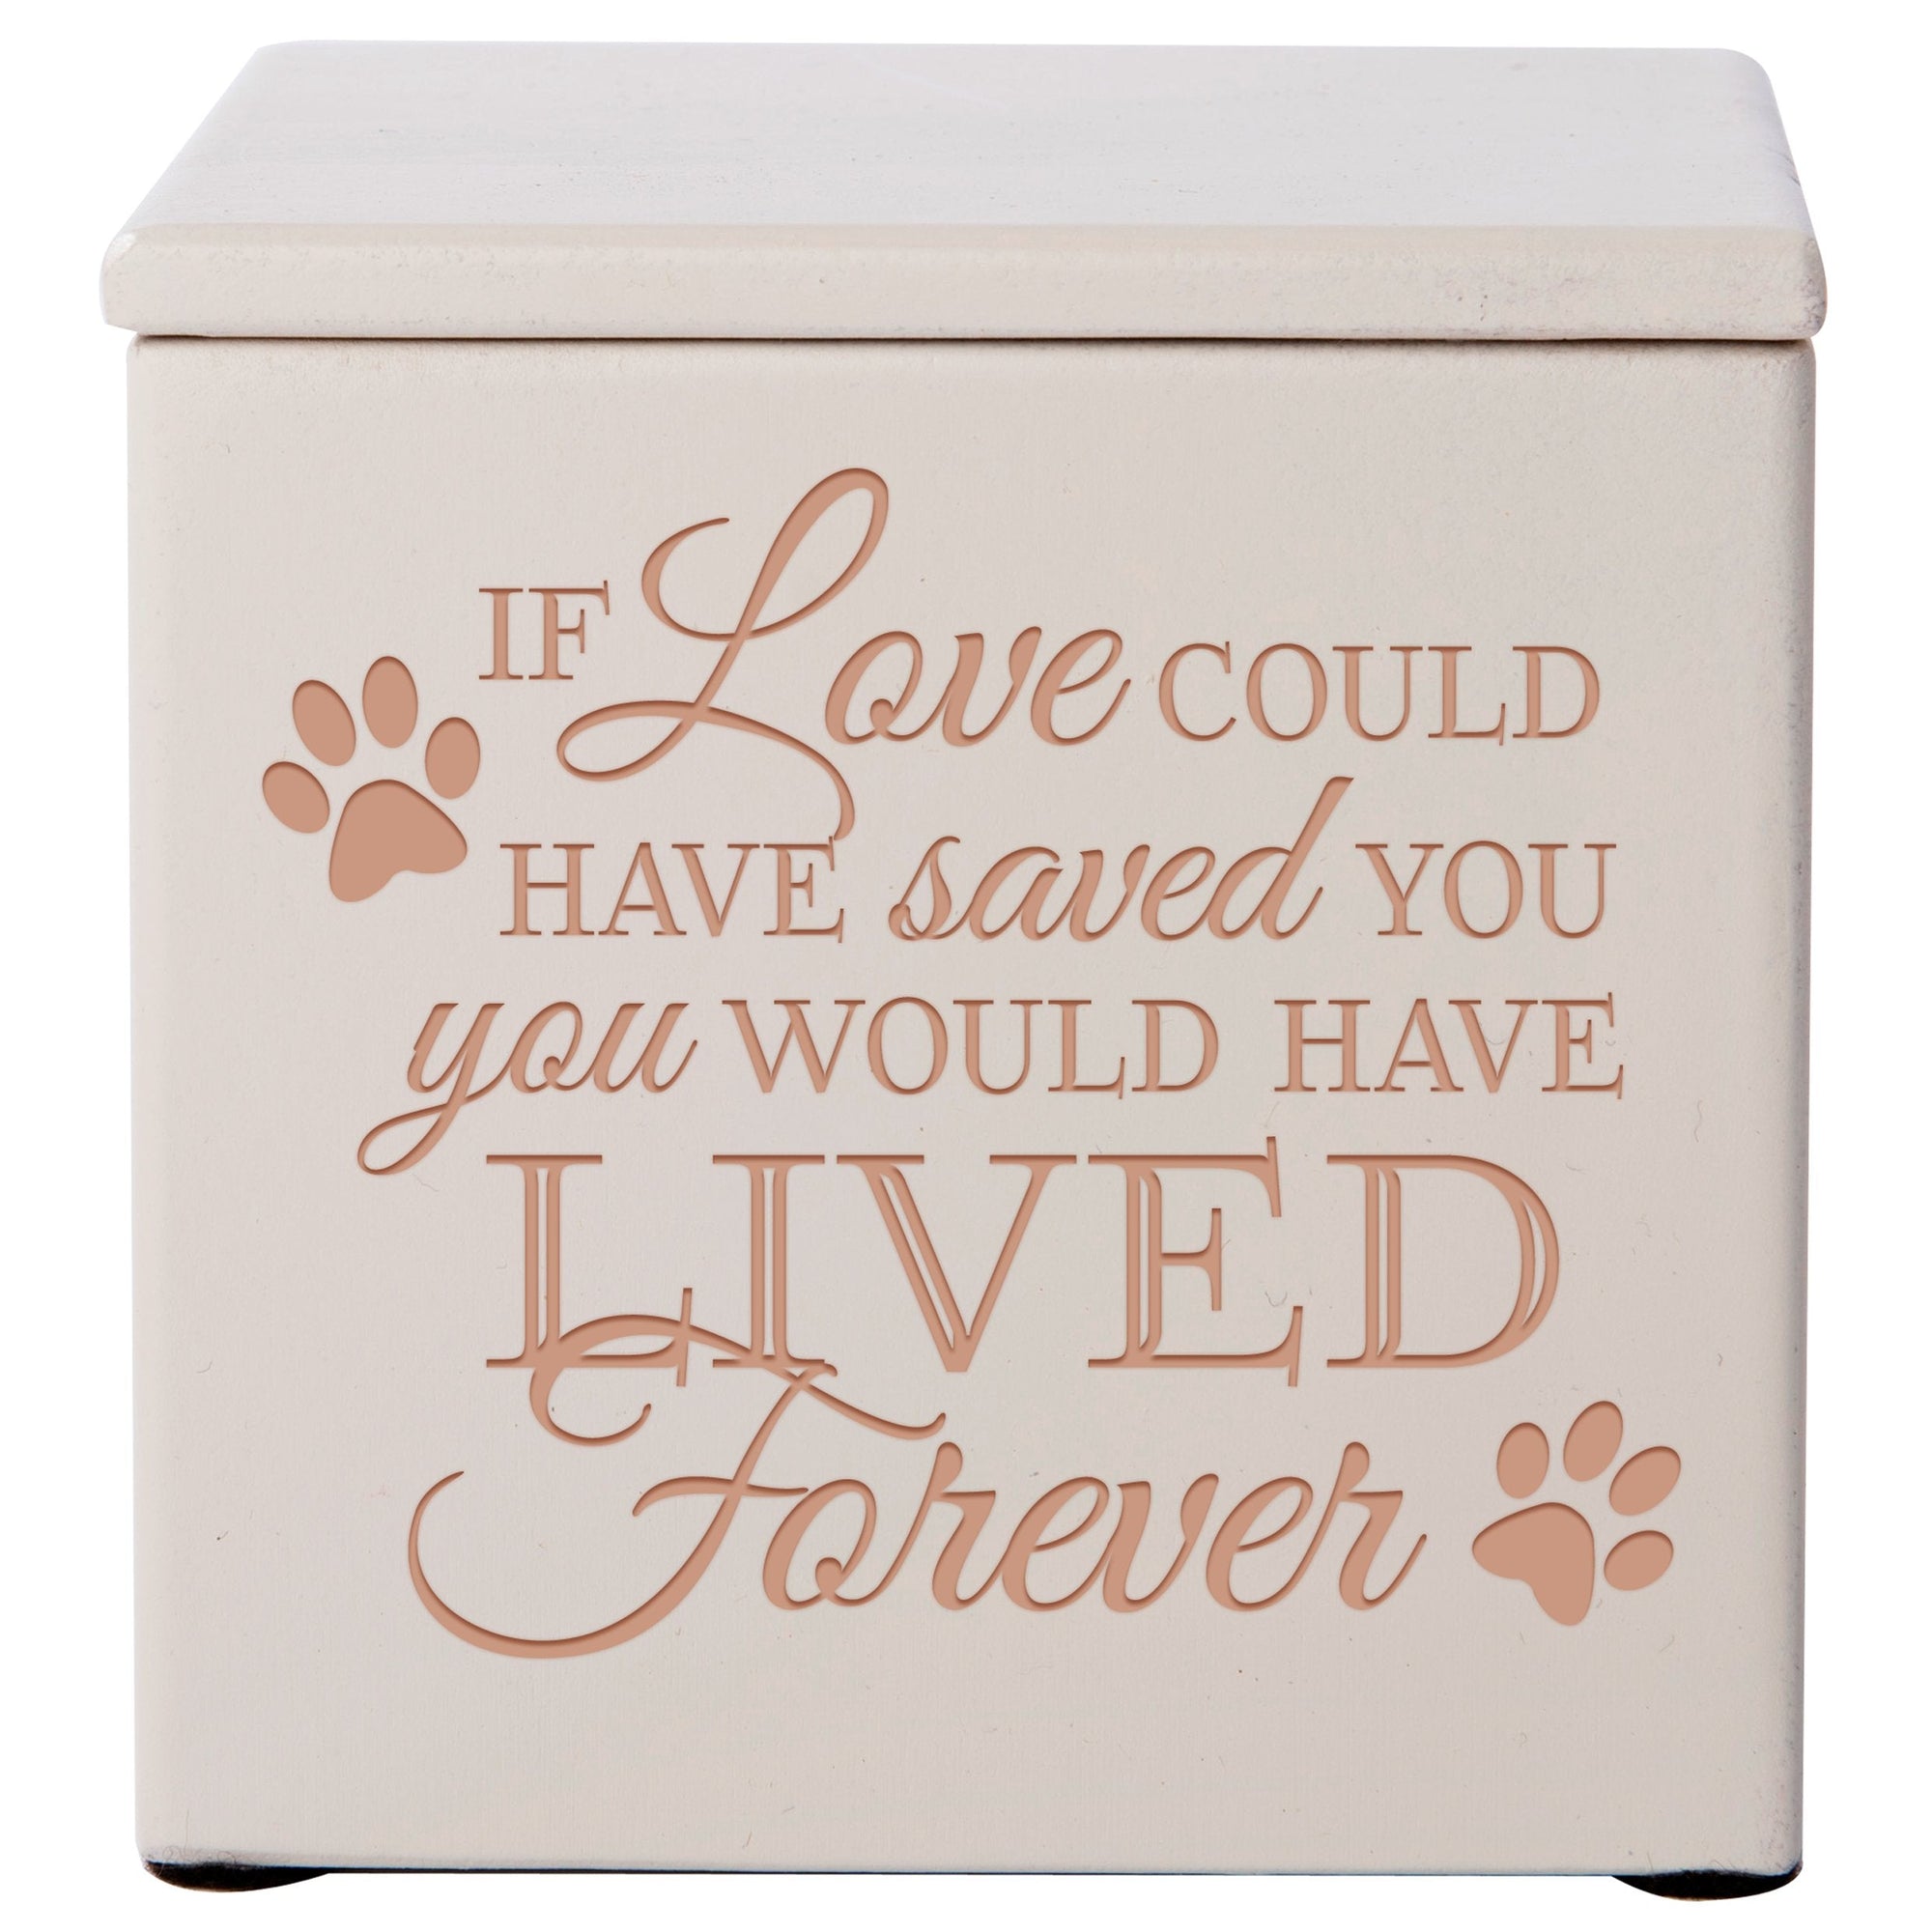 Ivory Pet Memorial 3.5x3.5 Keepsake Urn with phrase "If Love could Have Saved You"